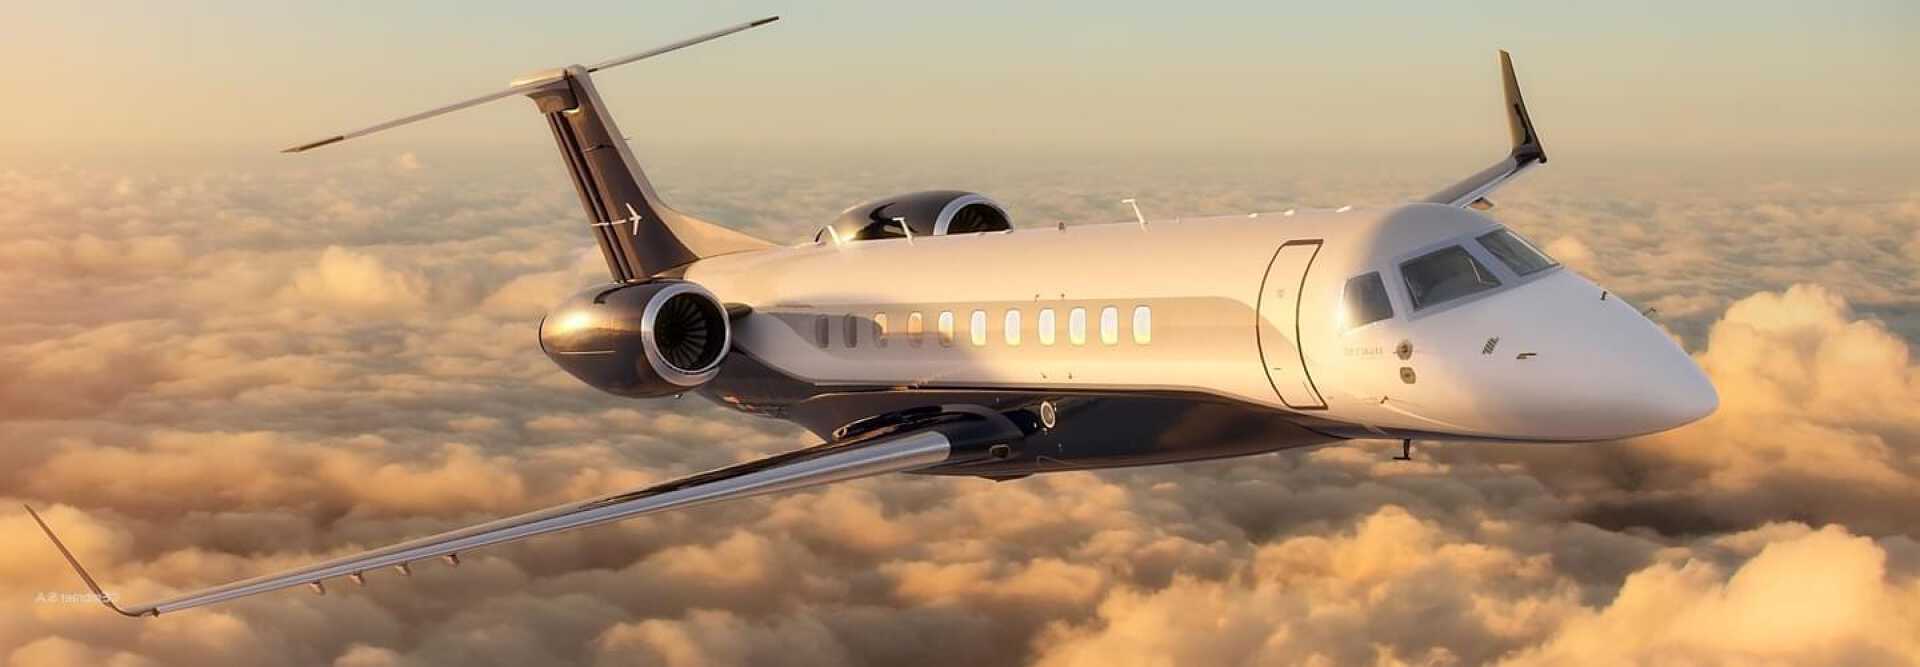 Large Business Jet Embraer Legacy 600 to charter for private aviation flights with LunaJets, extremely high-performance aircraft, optimum comfort